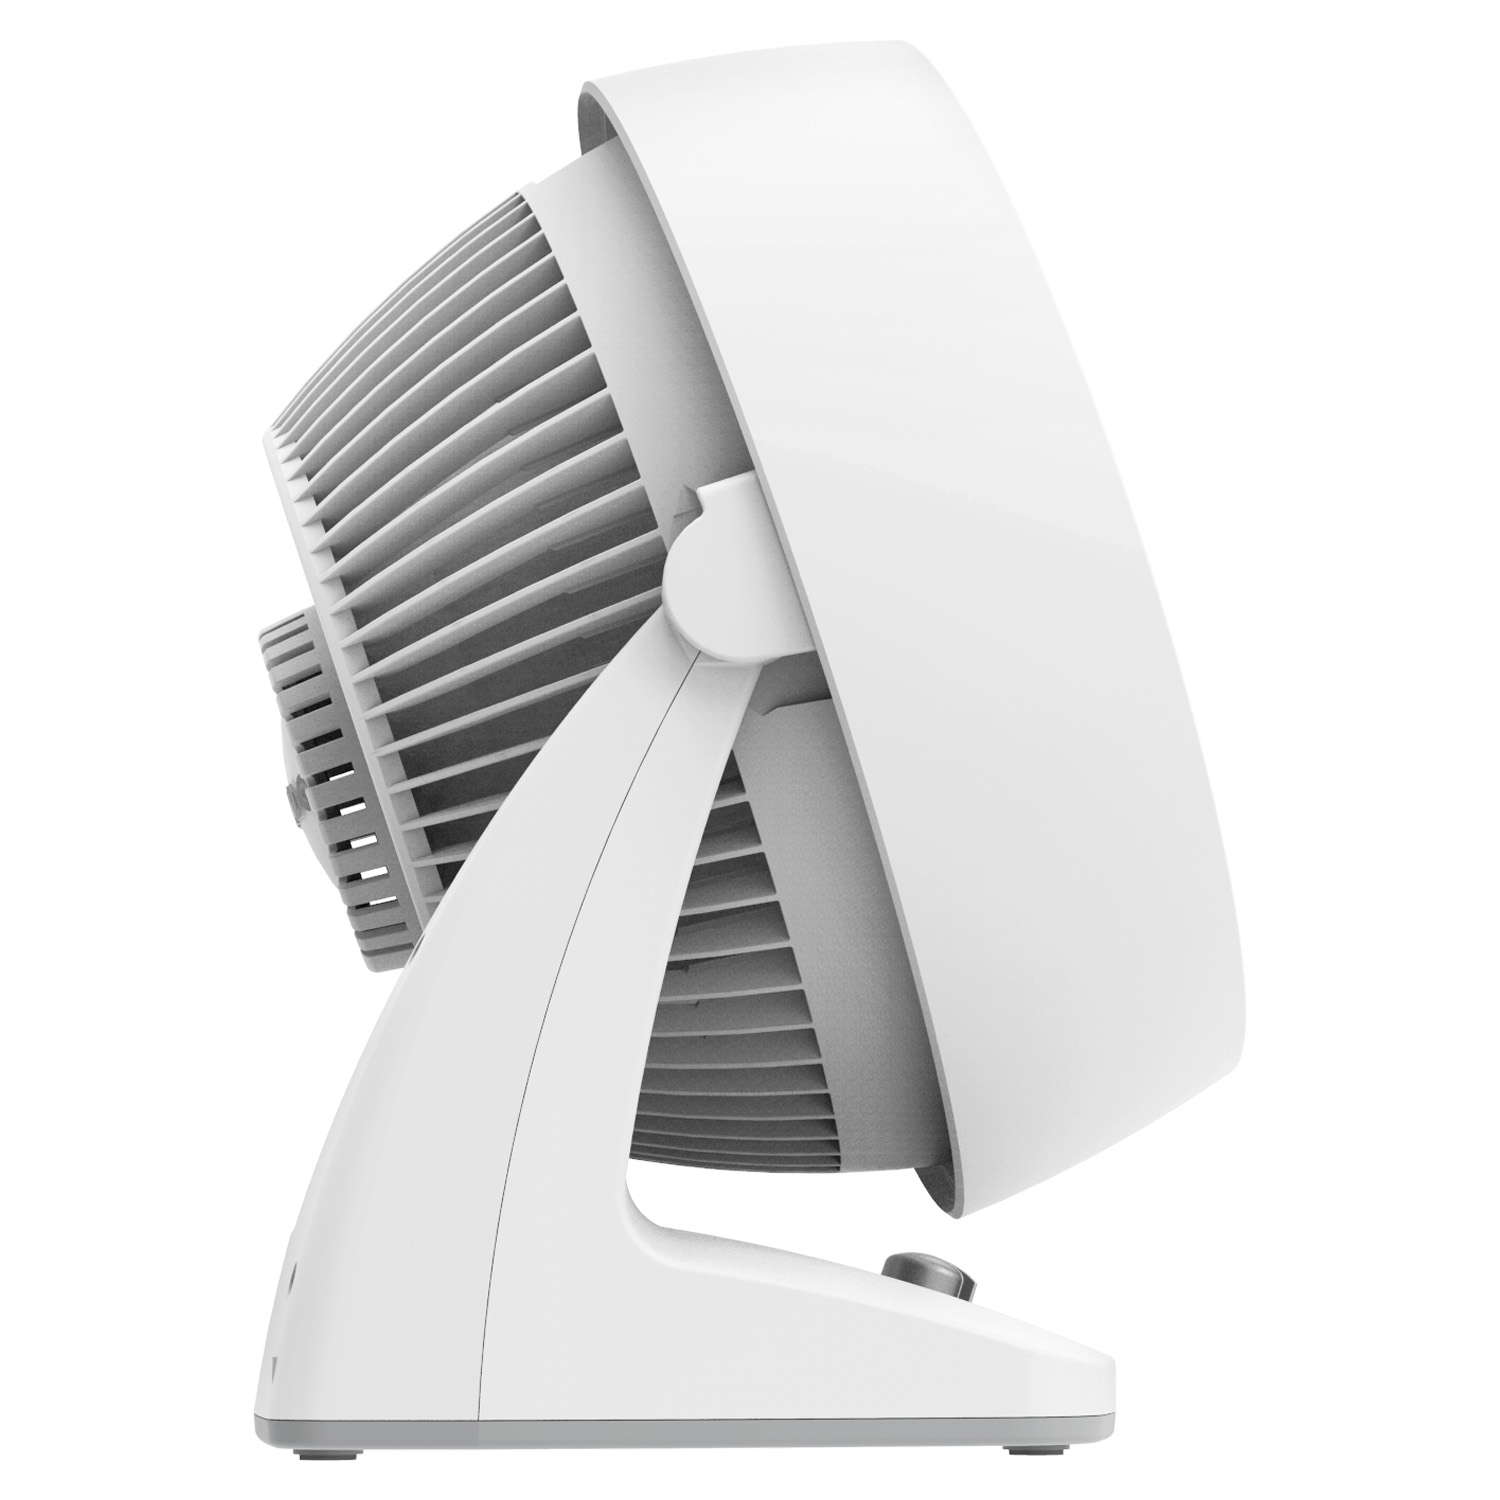 Vornado 633DC Energy Smart Medium Air Circulator Fan with Variable Speed Control, White - image 4 of 5